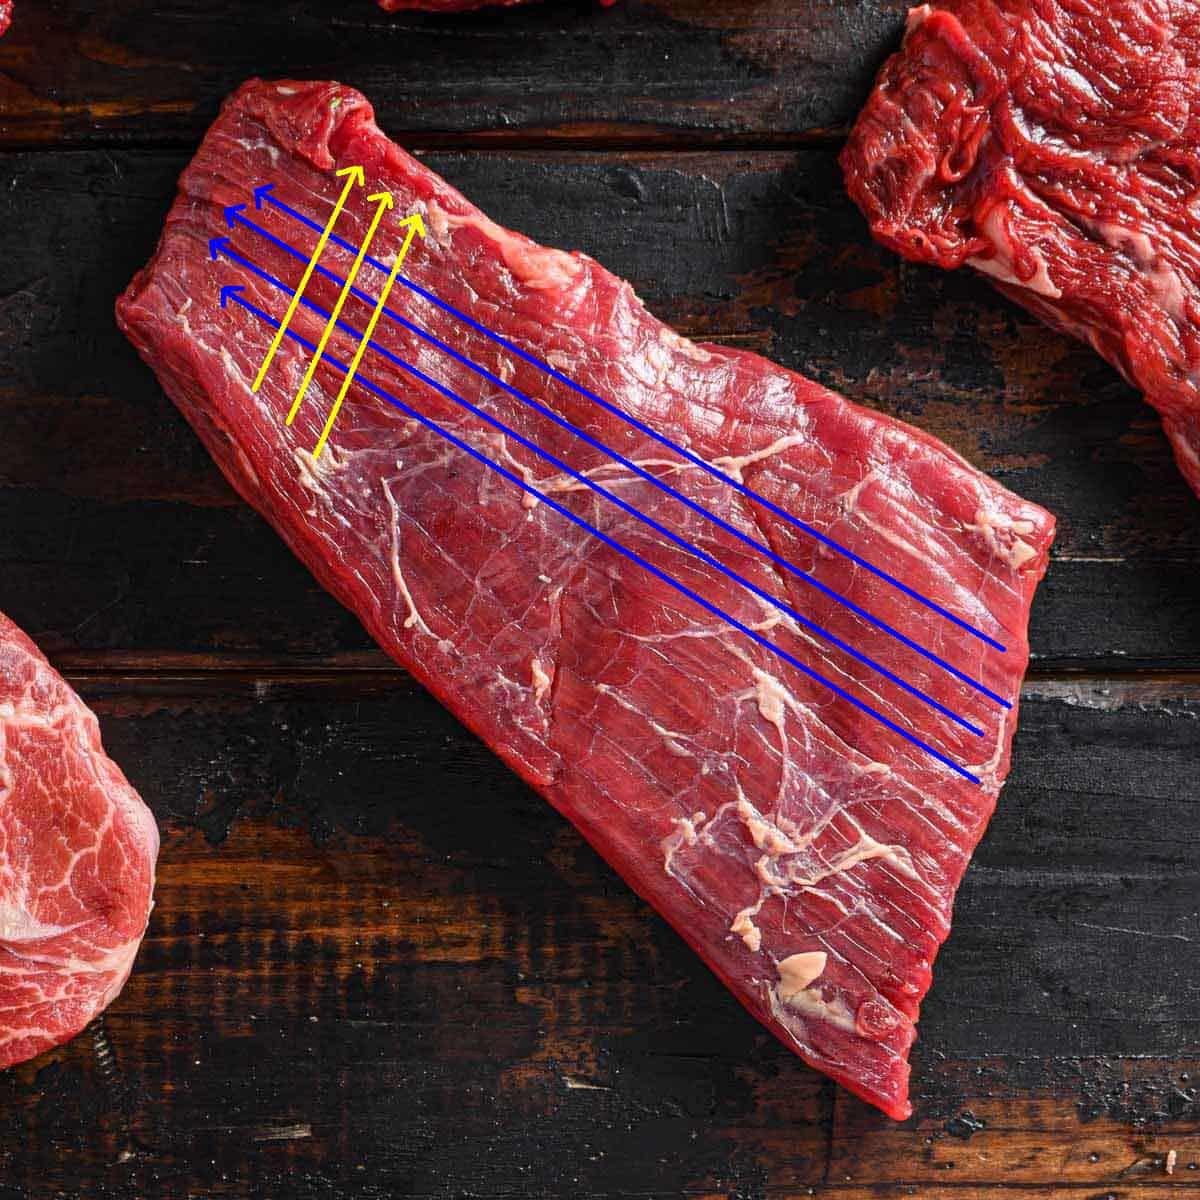 A steak is shown on a wood background with blue arrows indicating the grain of the meat and yellow arrows indicating where to cut.